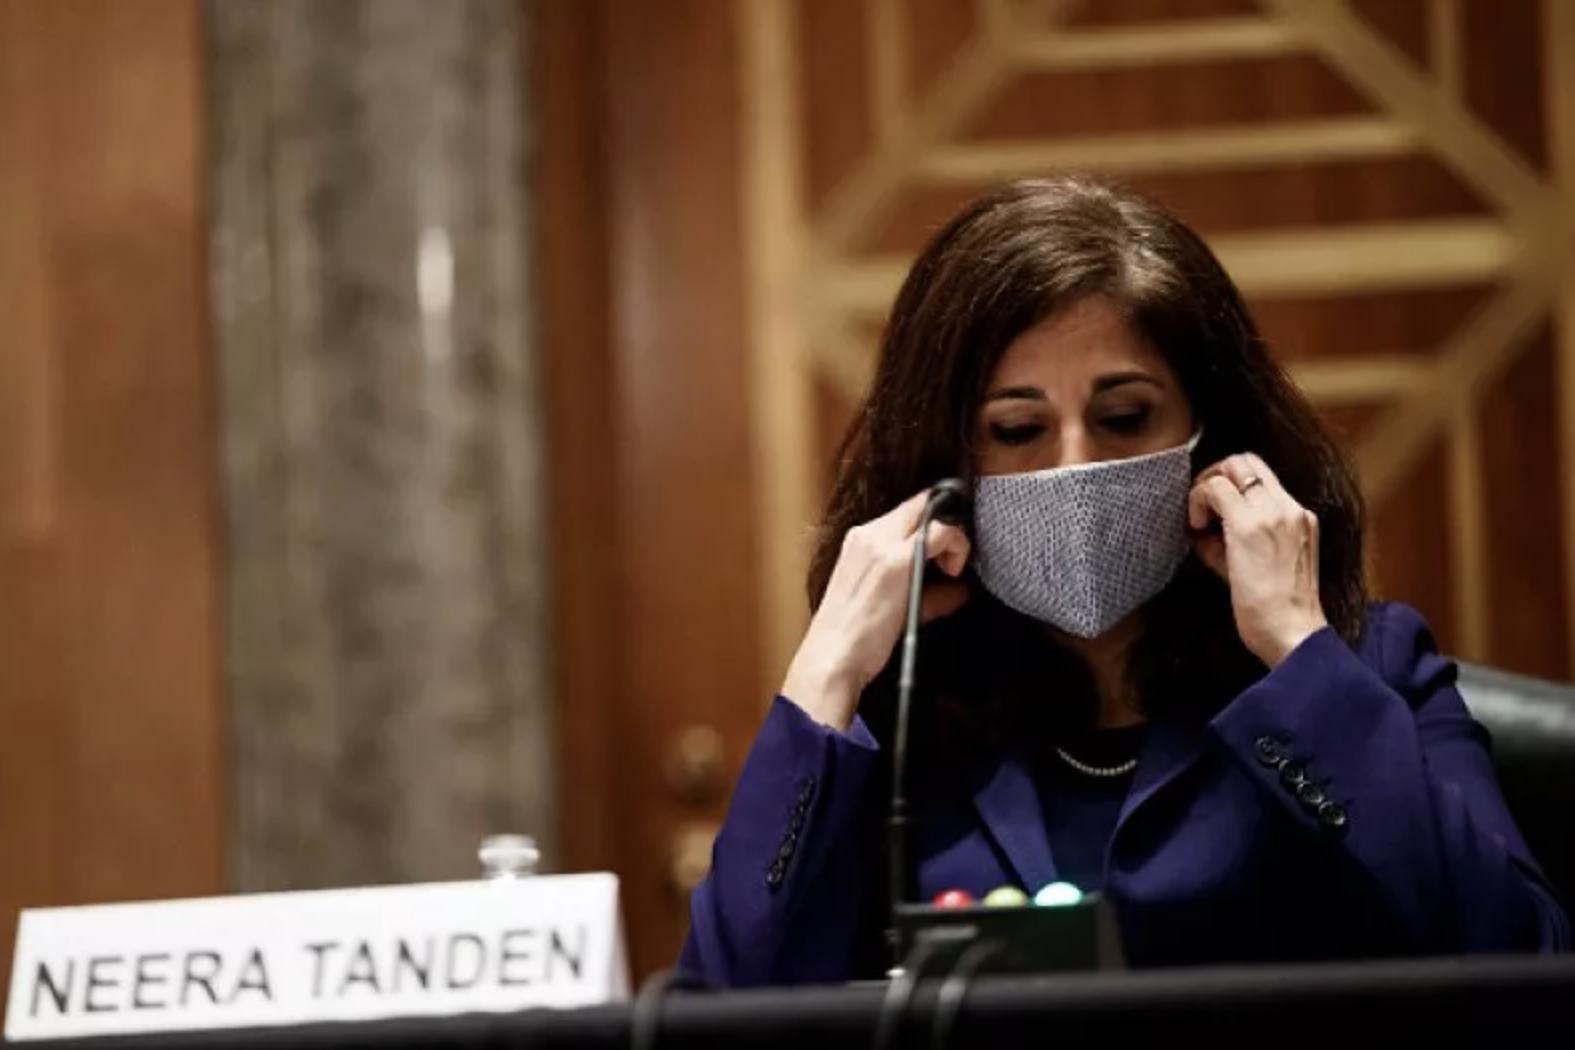 The Biden administration is heading back to square one as the chances for a Neera Tanden confirmation, the president's initial pick for director of the Office of Management and Budget, seems increasingly unlikely to gain enough Senate votes. Battenâs David Leblang spoke to Newsweek about potential candidates under consideration to take Tanden's place.